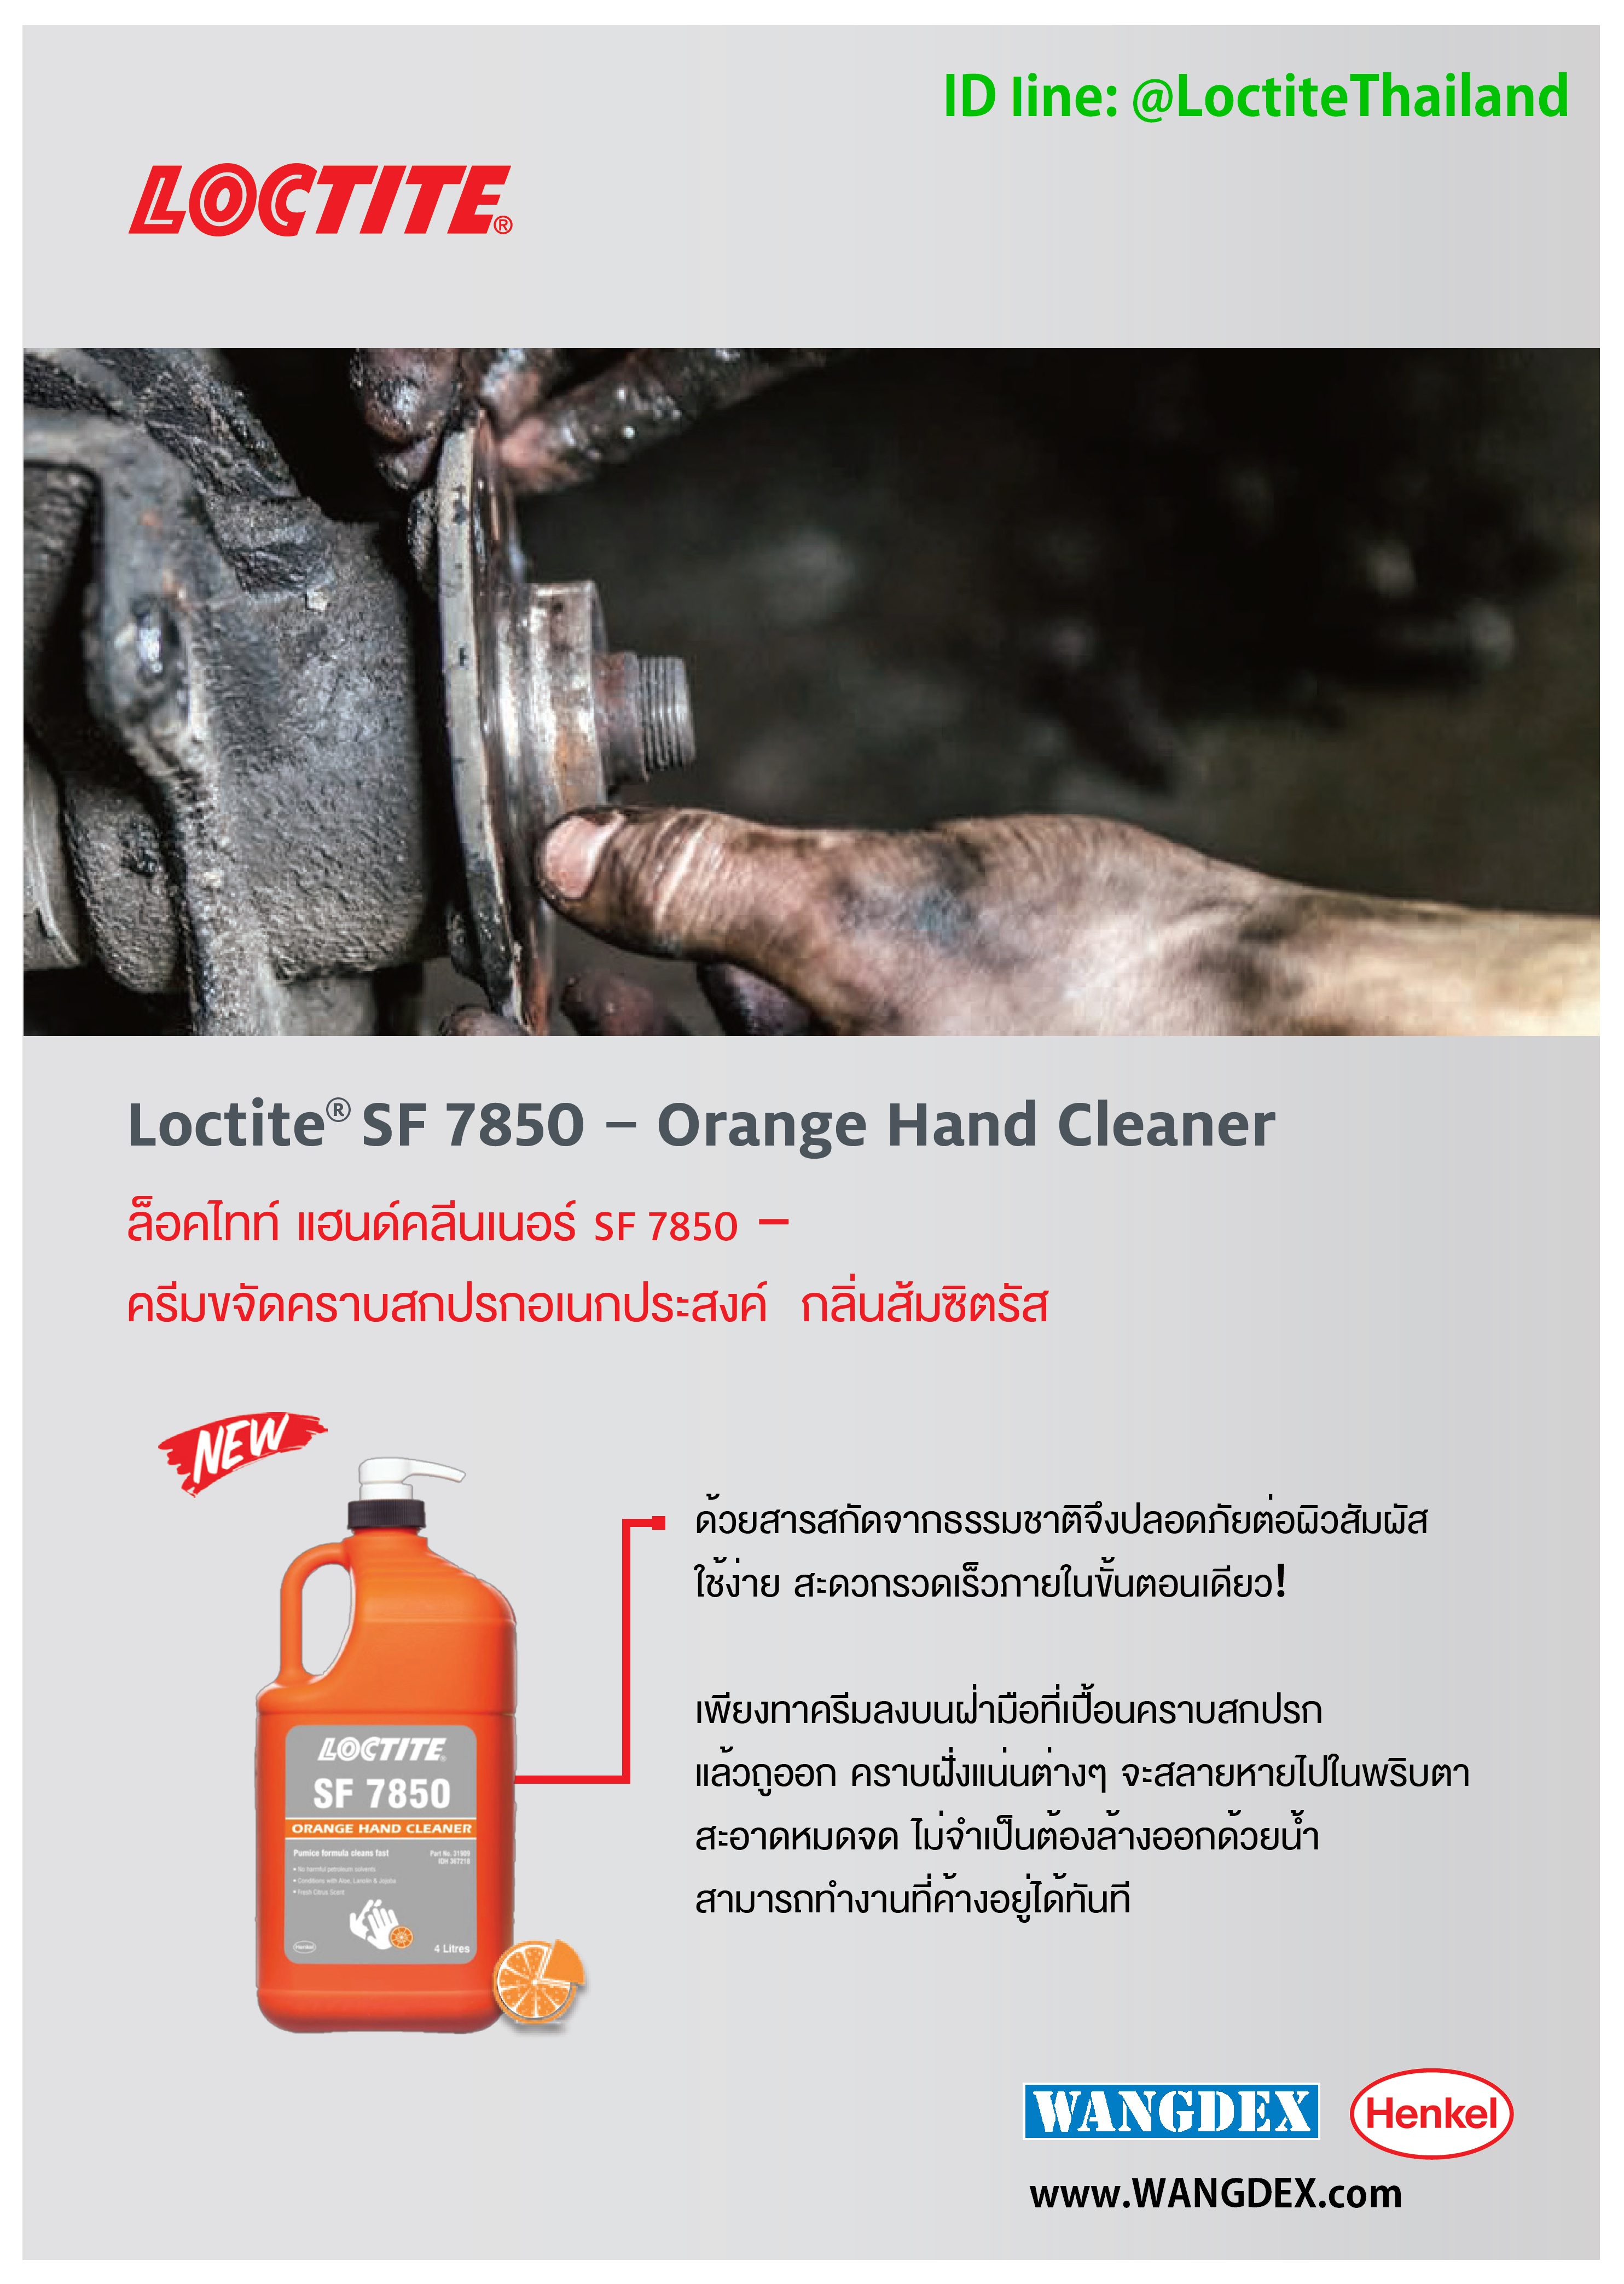 LOCTITE SF 7850 HAND CLEANER